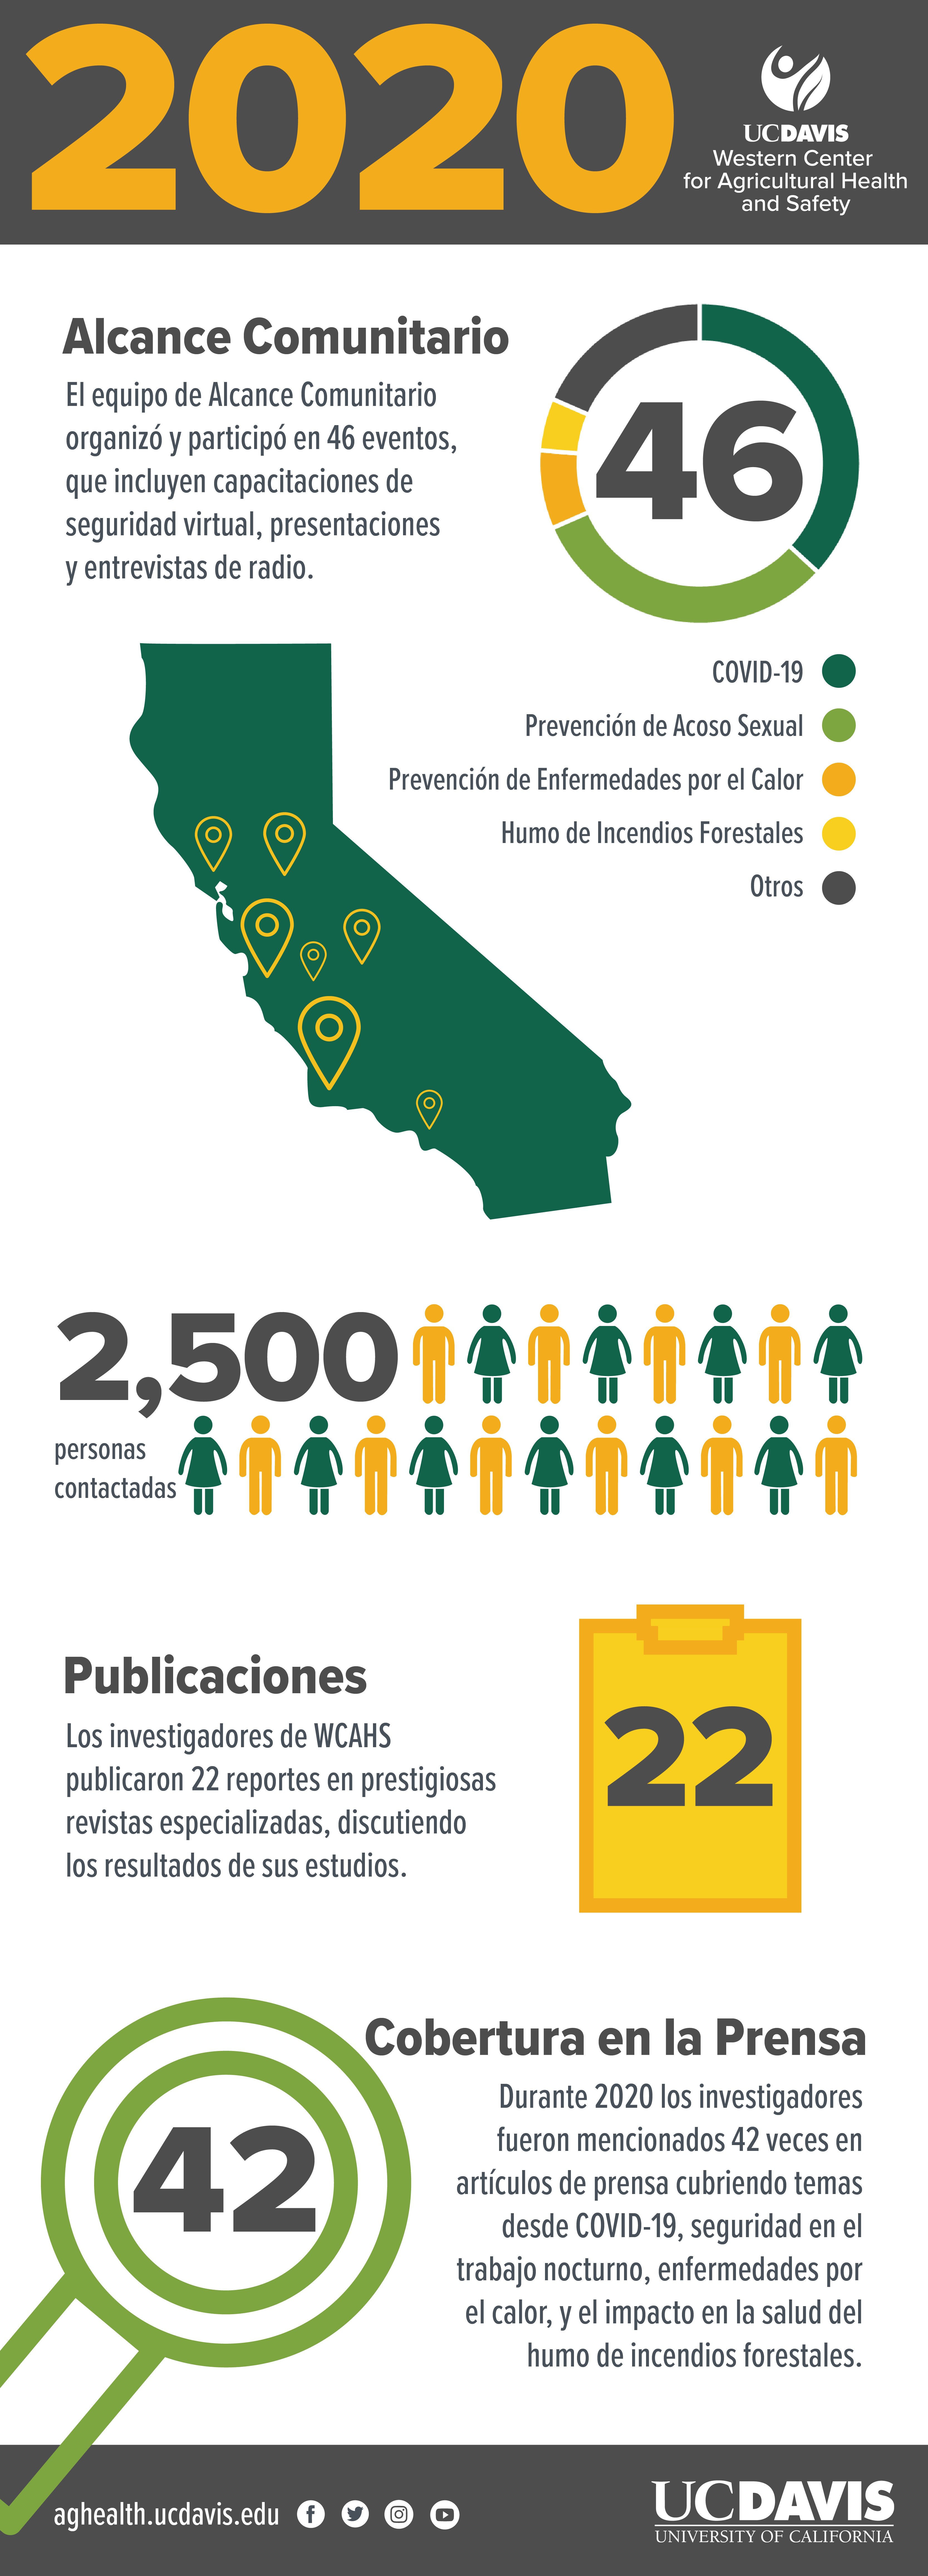 Infographic of Center activities for 2020 in Spanish